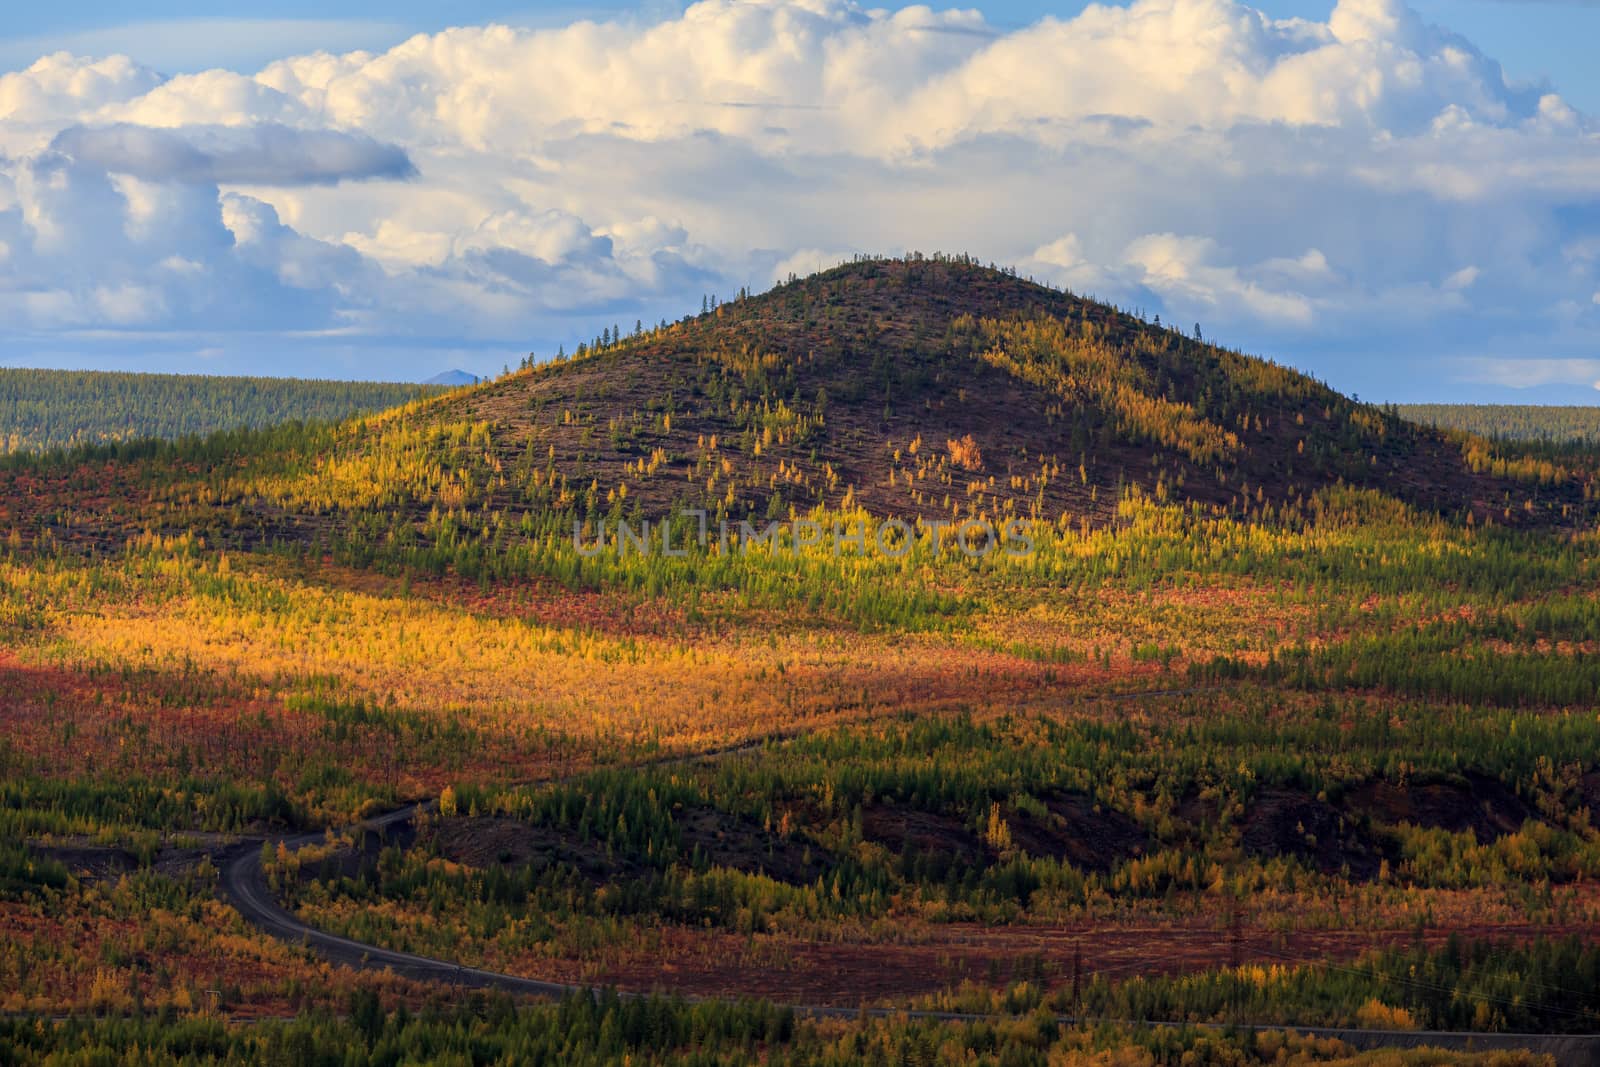 Bright low hills in the tundra, covered with grass and colorful trees. Russian tundra